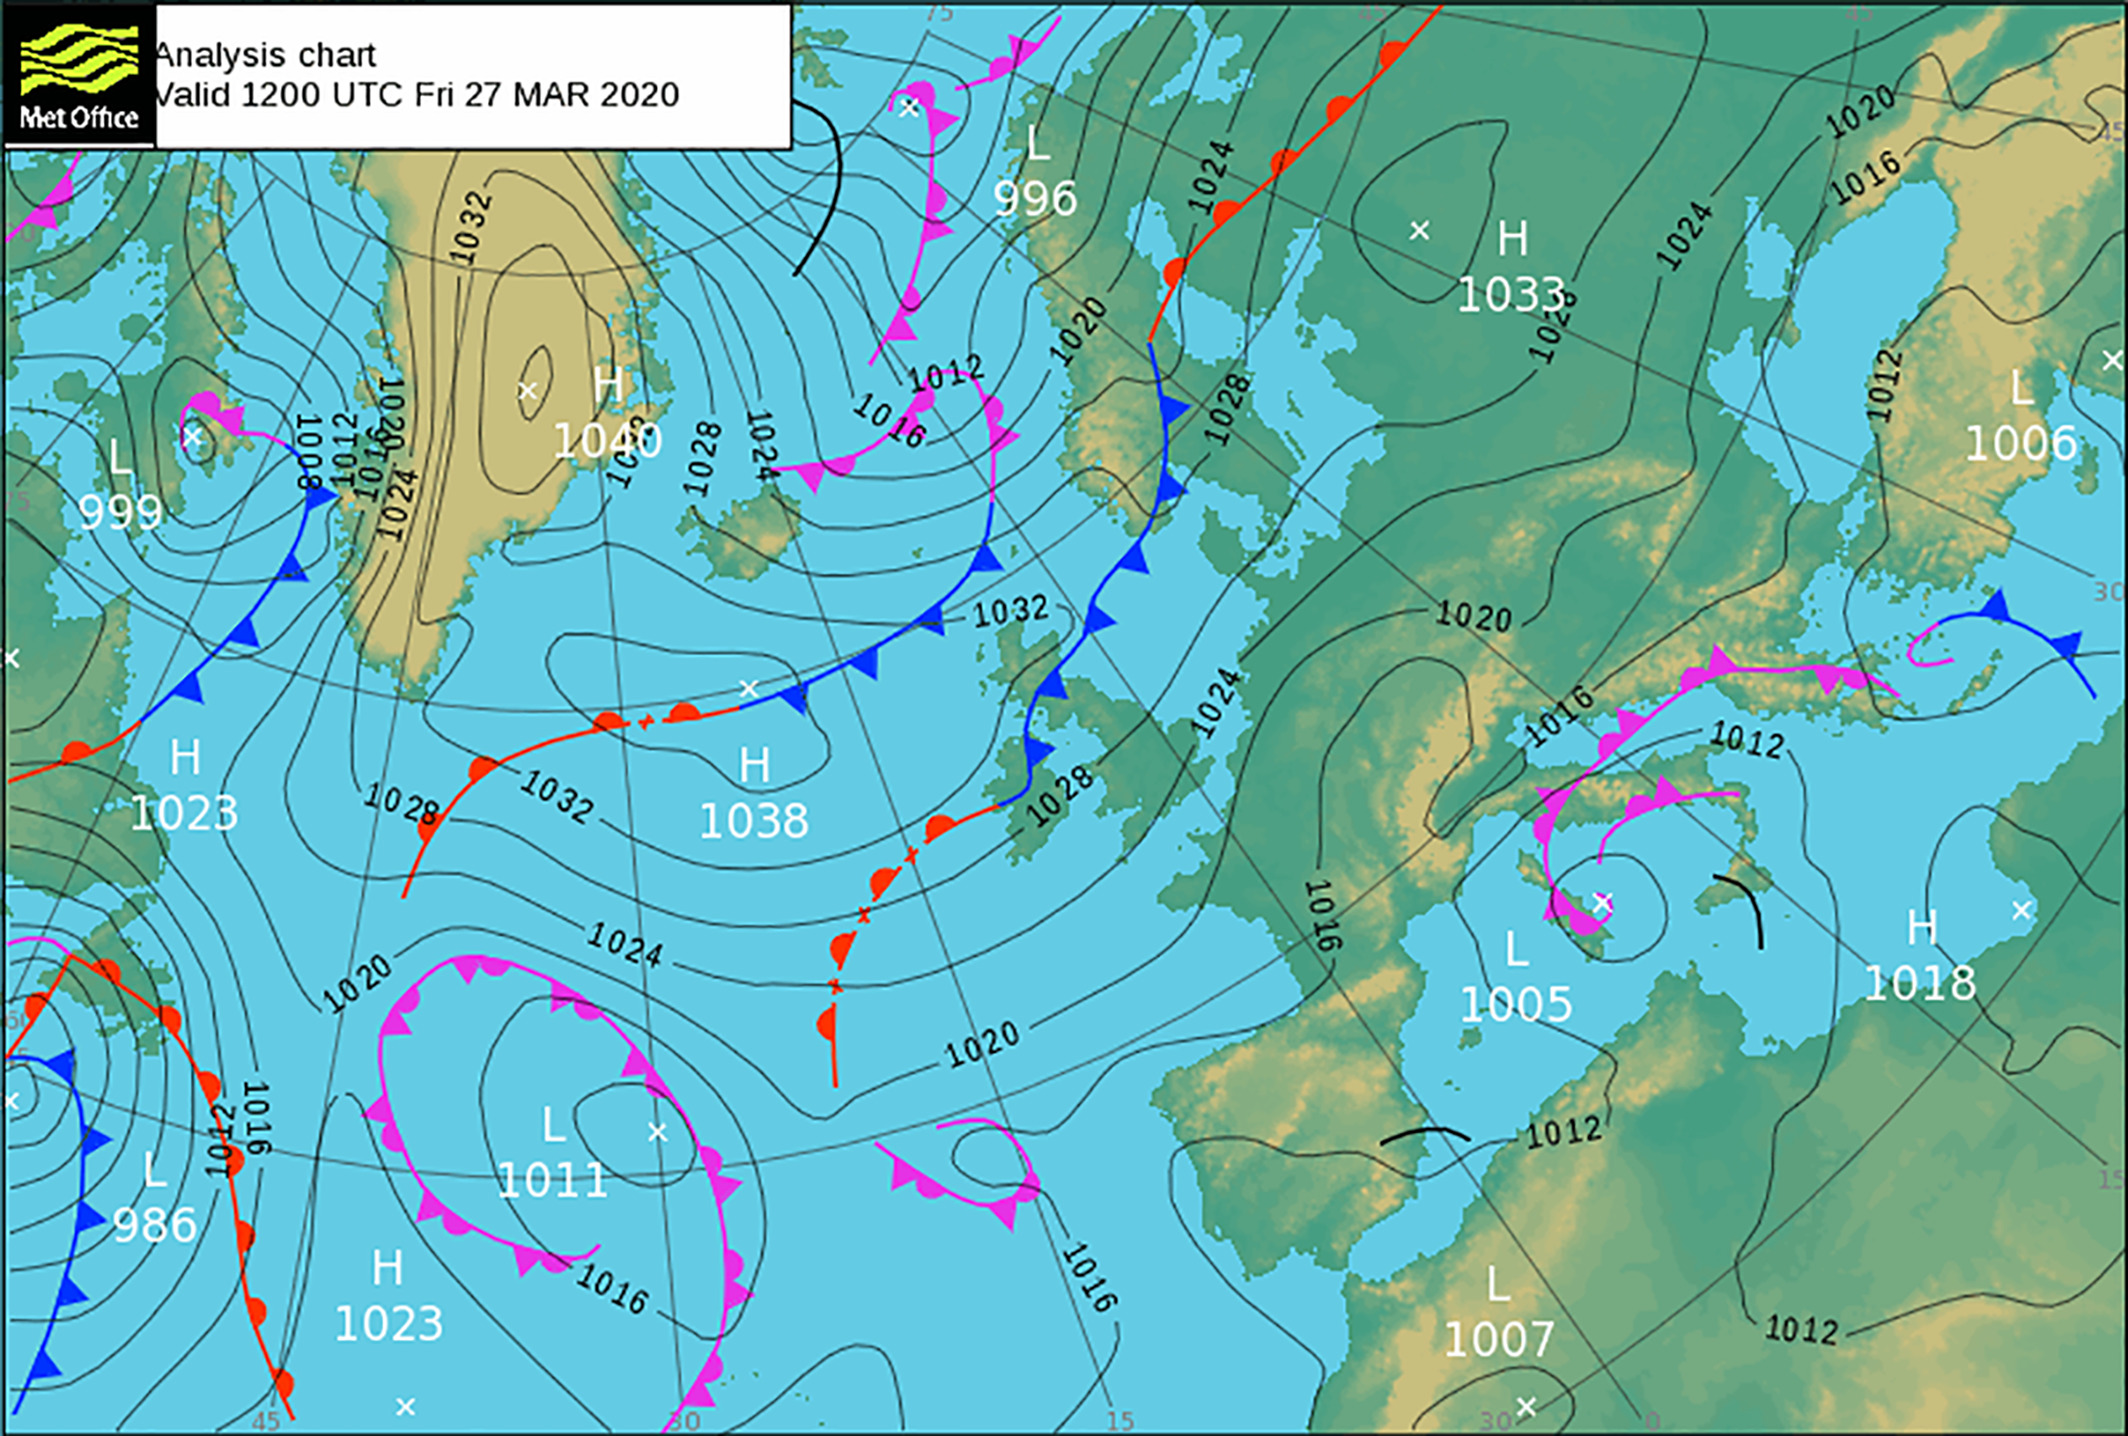 Met Office North Atlantic analysis chart for 1200 GMT 27 March 2020 (Courtesy Met Office: Crown Copyright)